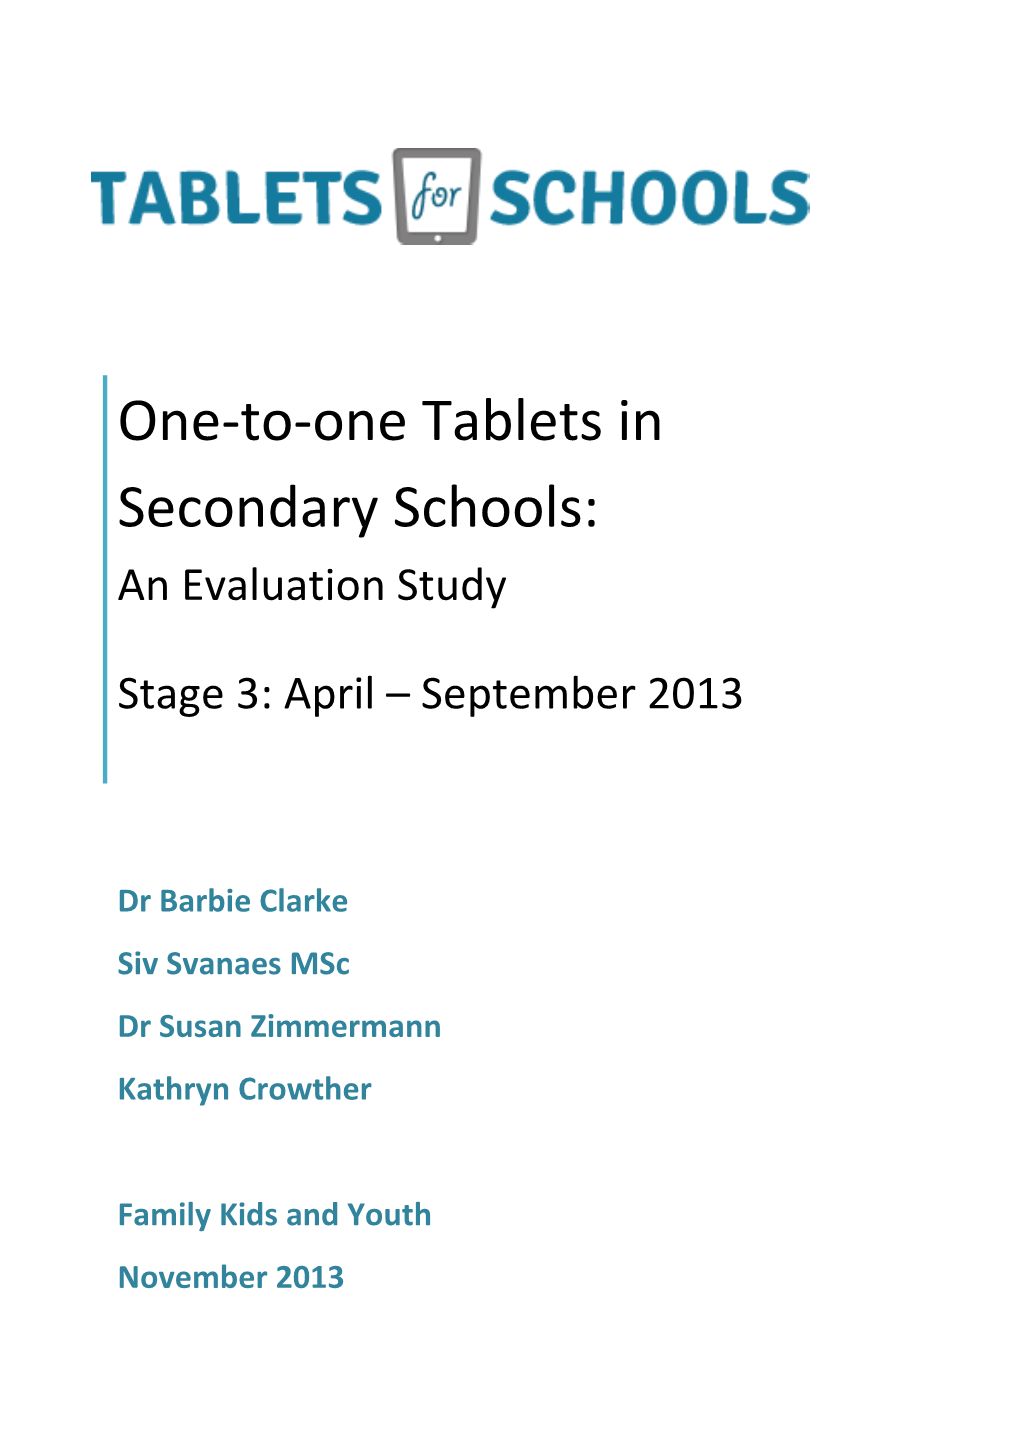 One-To-One Tablets in Secondary Schools: an Evaluation Study